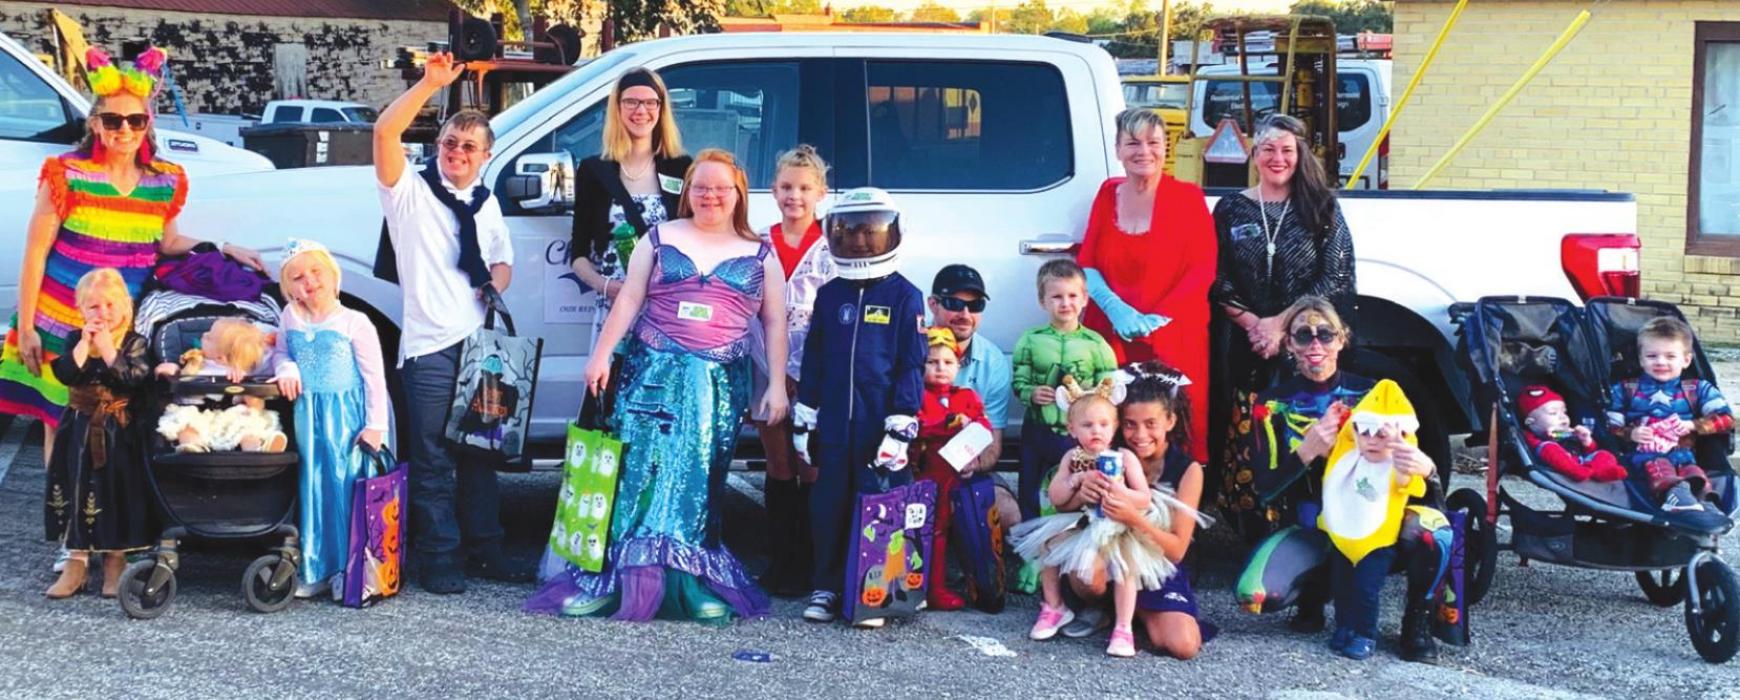 Monster Dash Costume Finalists included: Tyson Mendel, Casen Strickland, Brock Mendel, and Camden Strickland (the Avengers); Camden Demel (baby shark); Clay Hoffmann (astronaut); Kathy and Nita Chovancec (fancy ladies); Lyric Ahrens (giraffe); Brooke Shimek (mermaid); Cate Hooper (Elvis); Dawson, Paisley and Harper Guentert (Anna, Elsa and Olaf), and Emma Kubala and Will Keilbach (Ken and Barbie). Not pictured - Raven Demel (Native American Indian).